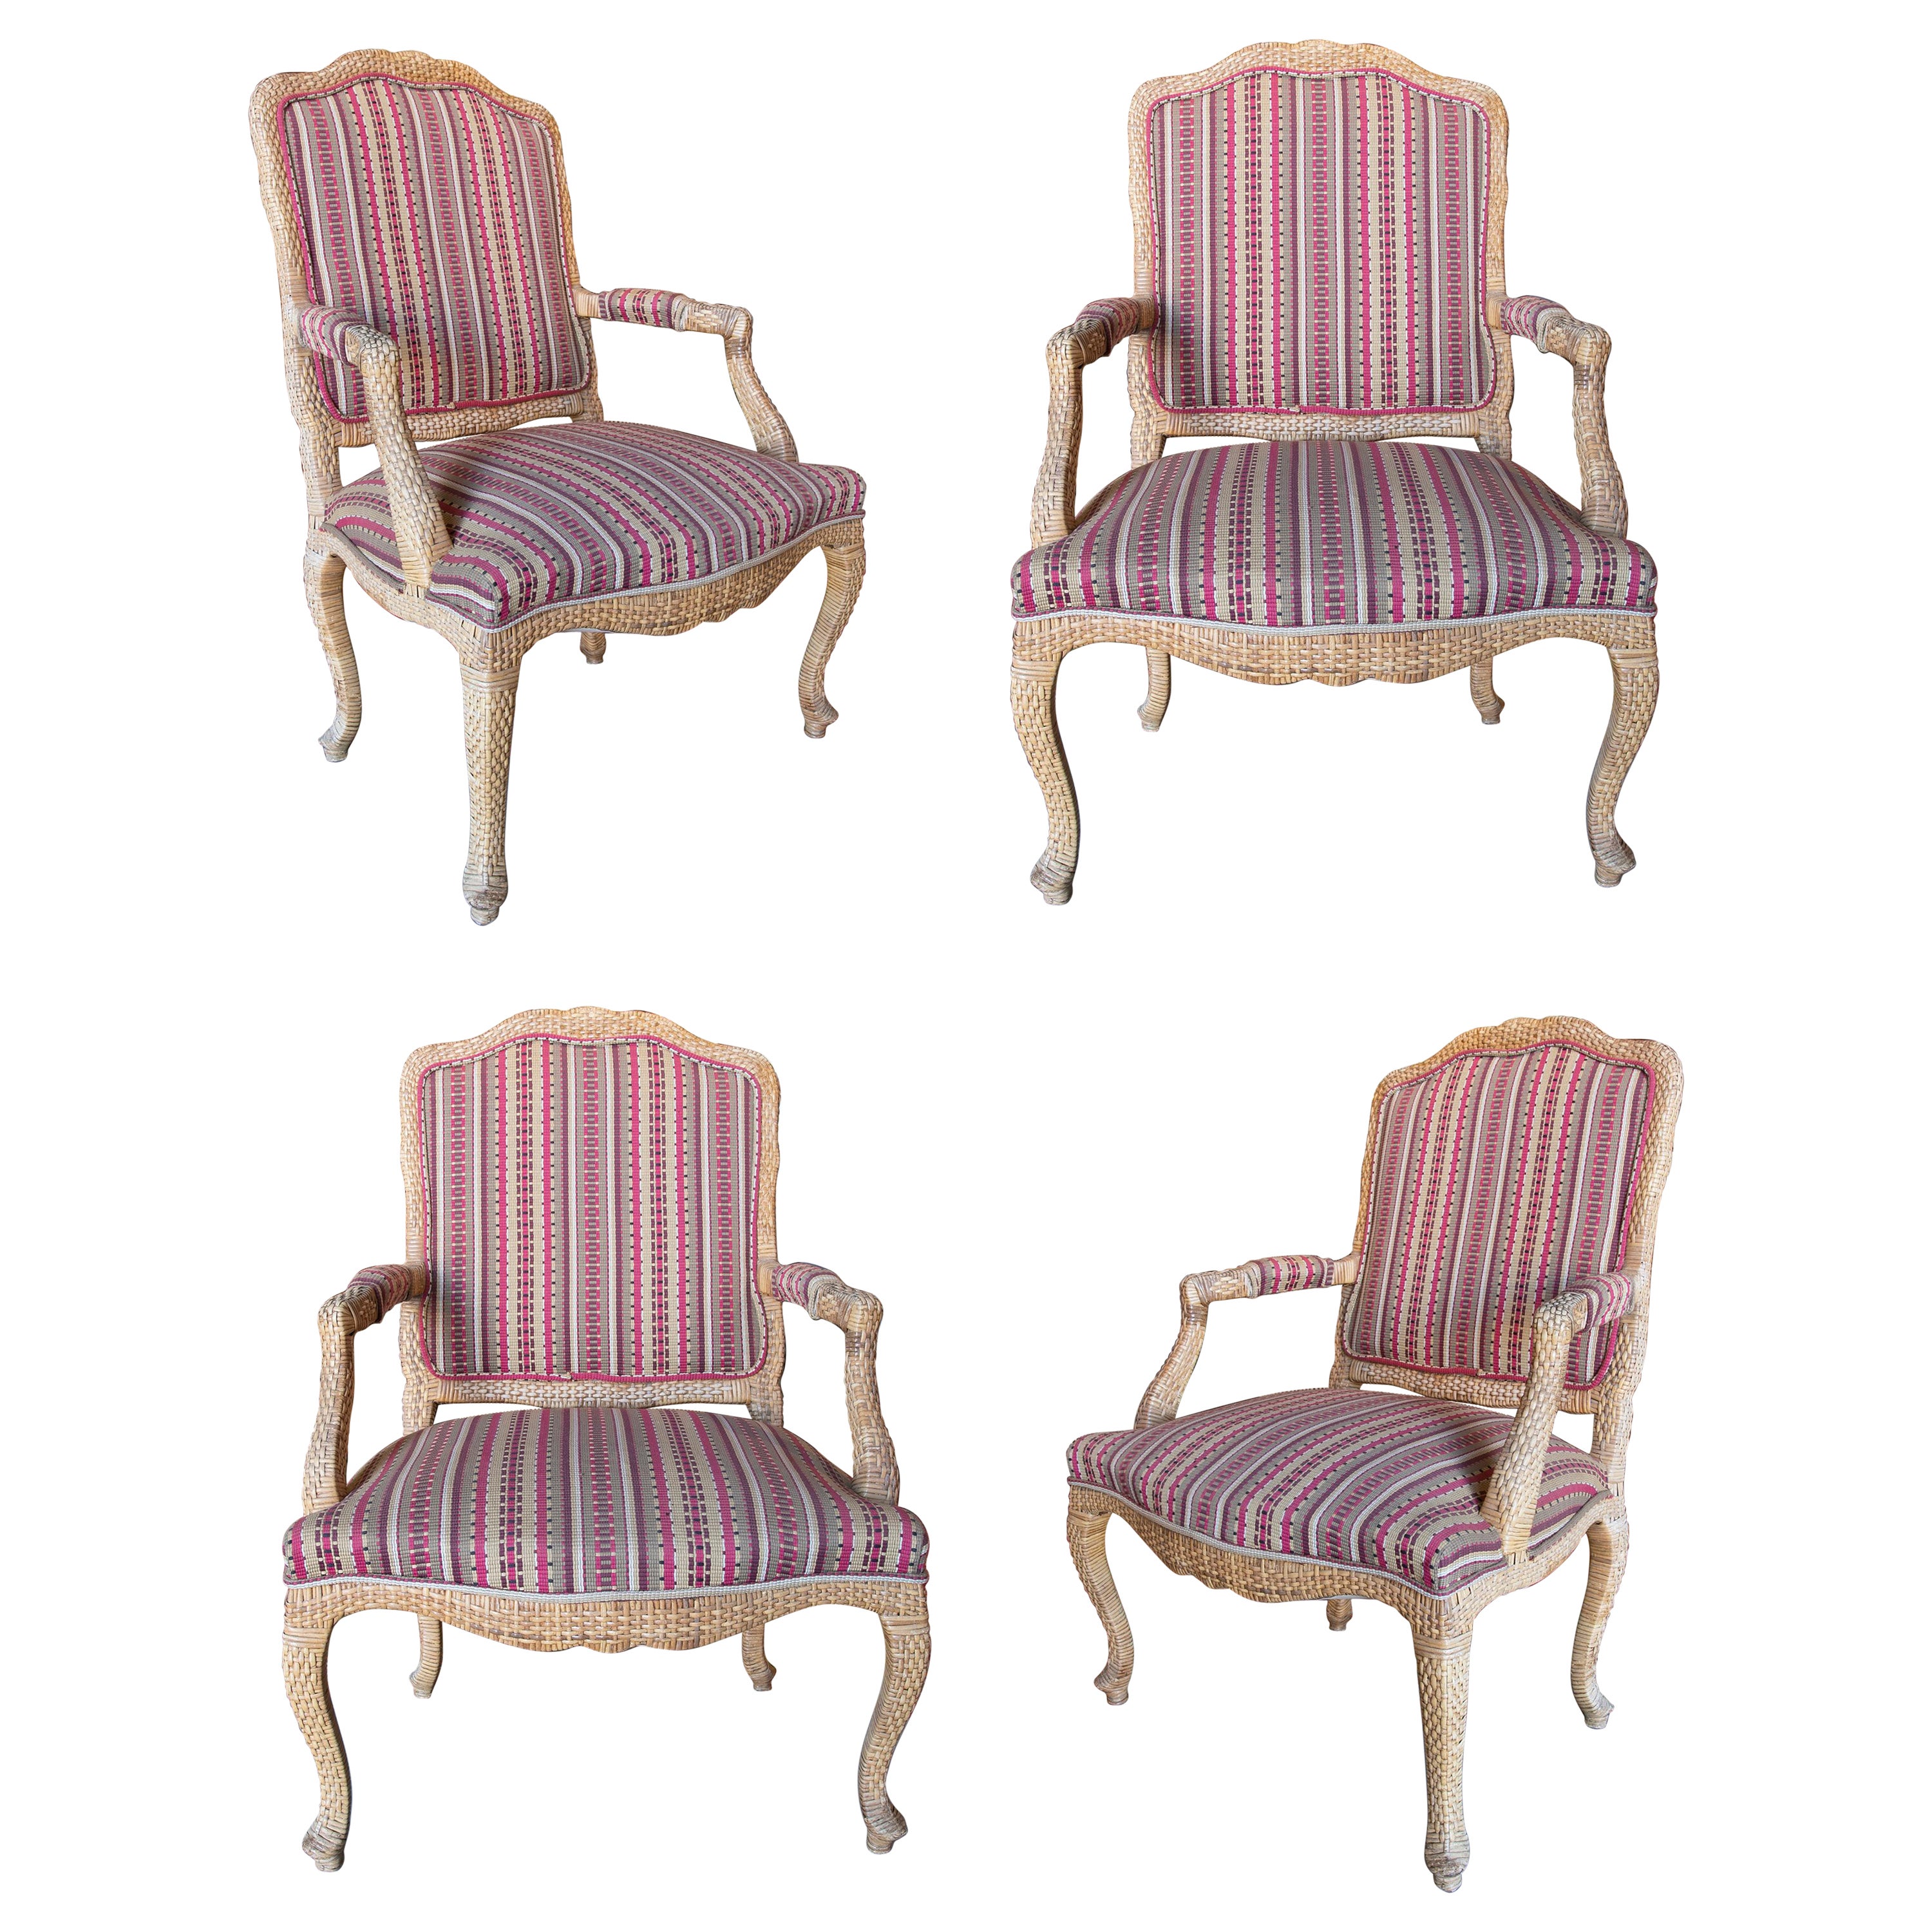 1970s Set of Four Upholstered Wooden & Wicker Armchairs